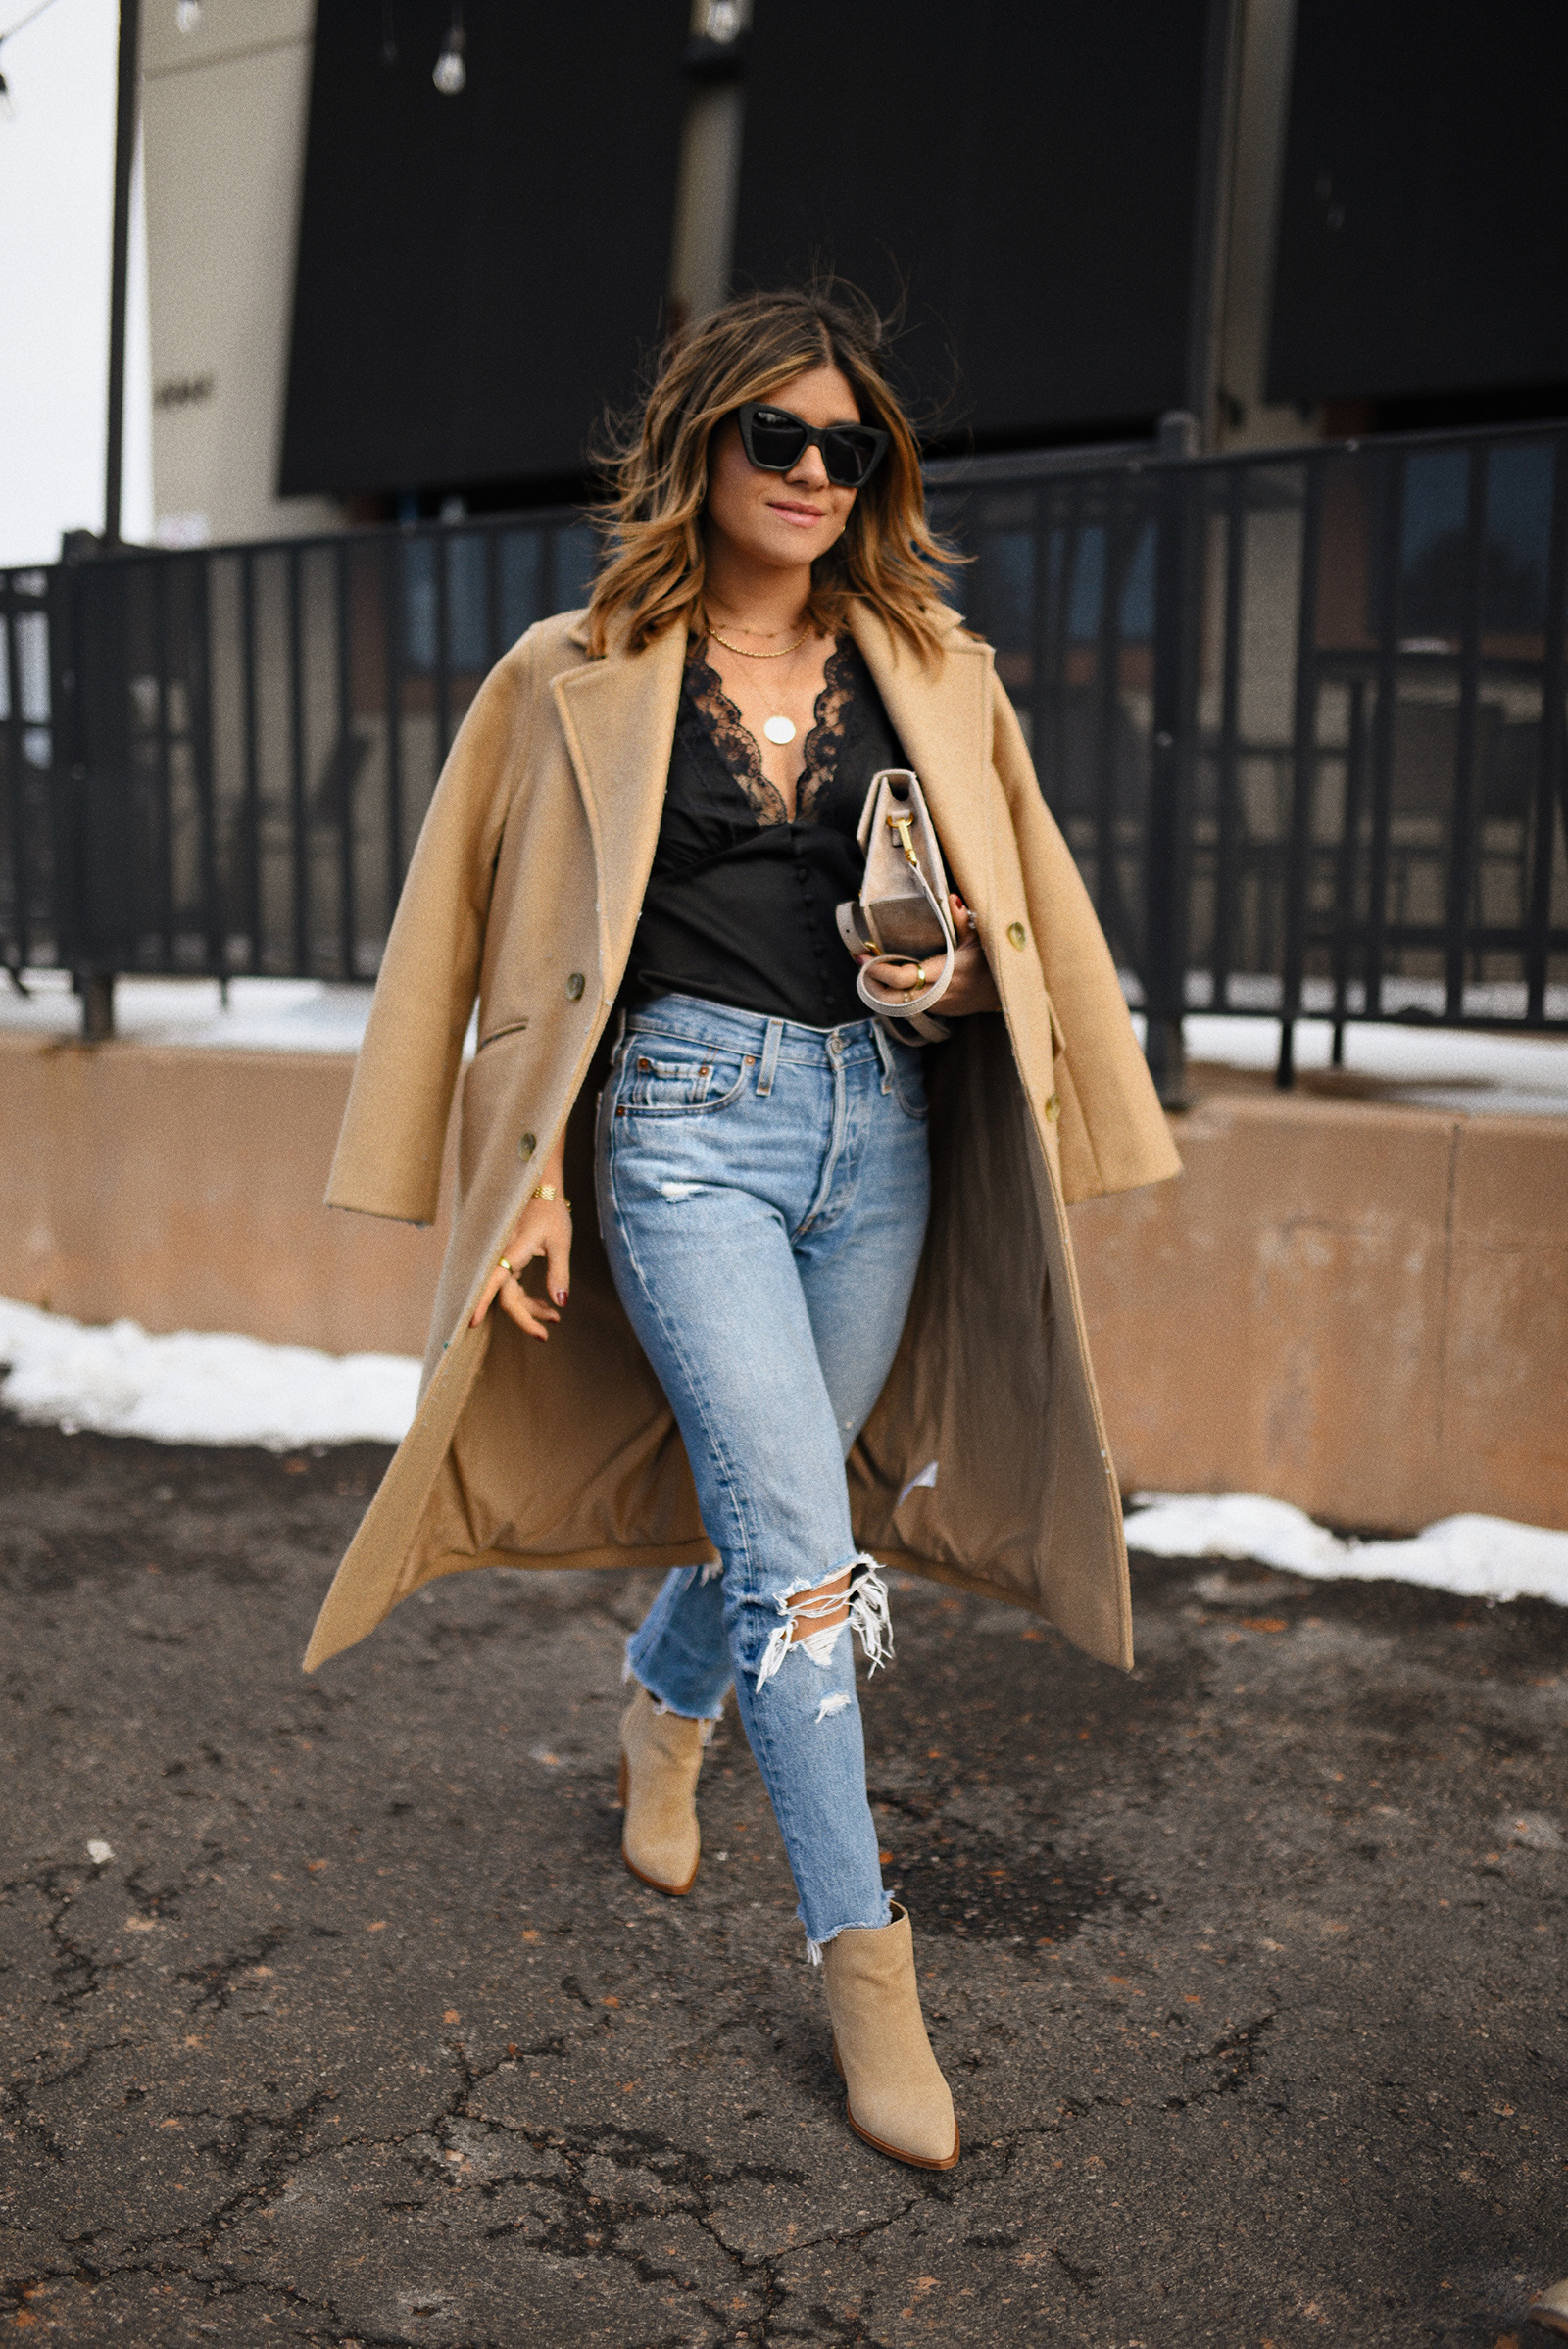 Carolina Hellal of Chic Talk wearing a WAYF black top with lace trims, Levi's 501 skinny jeans, Vince Camuto suede booties and Everlane camel coat. 